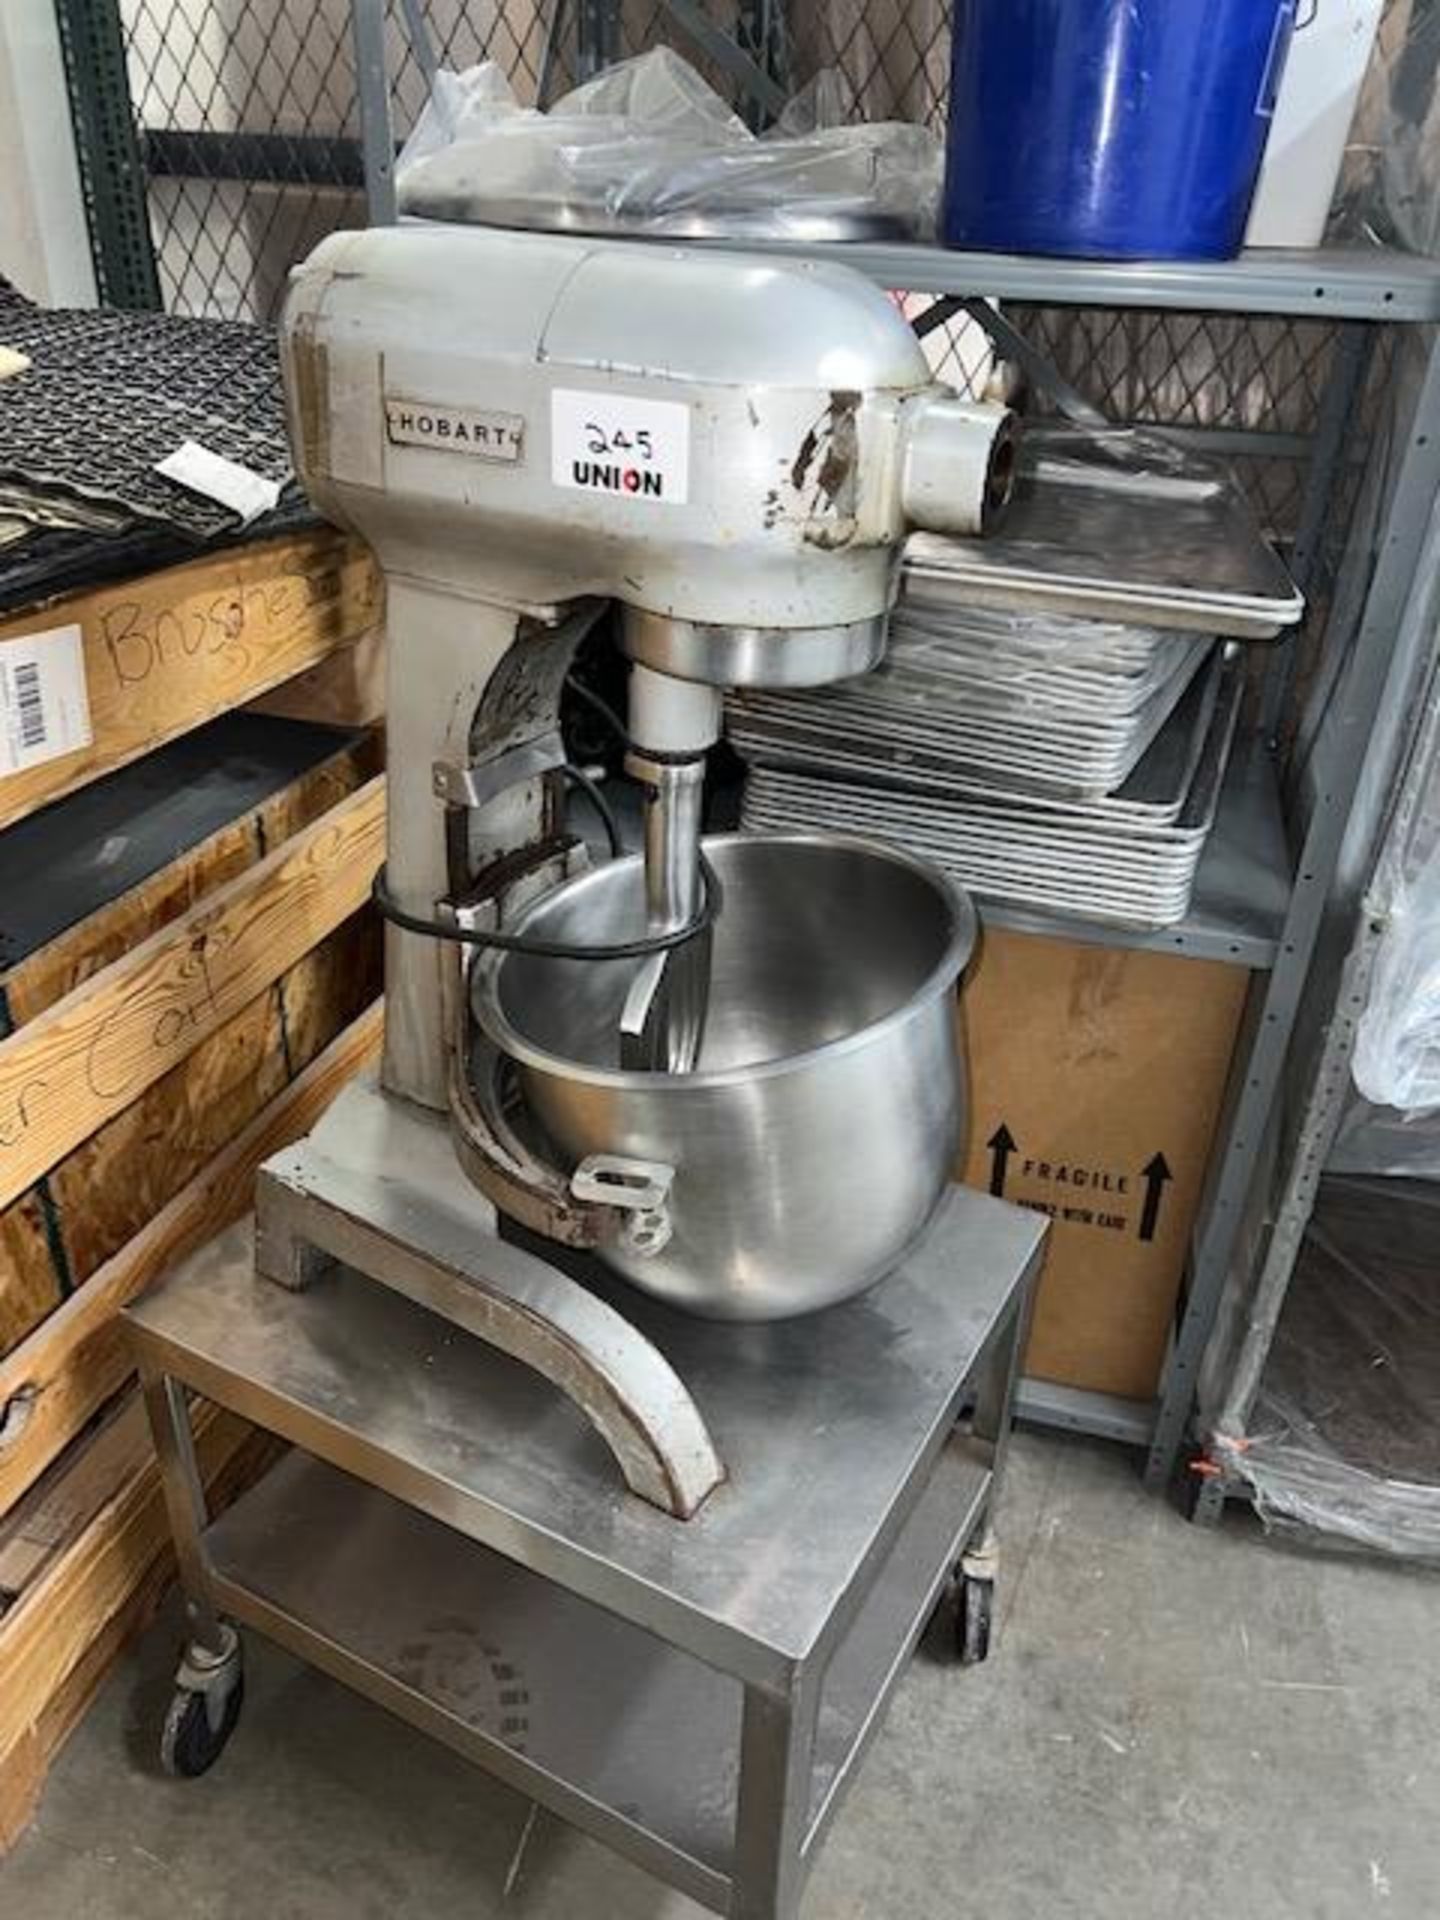 Asset 245 - Hobart 20 quart Mixer, Model A200 with stainless steel bowl and flat beater, 3 speed,